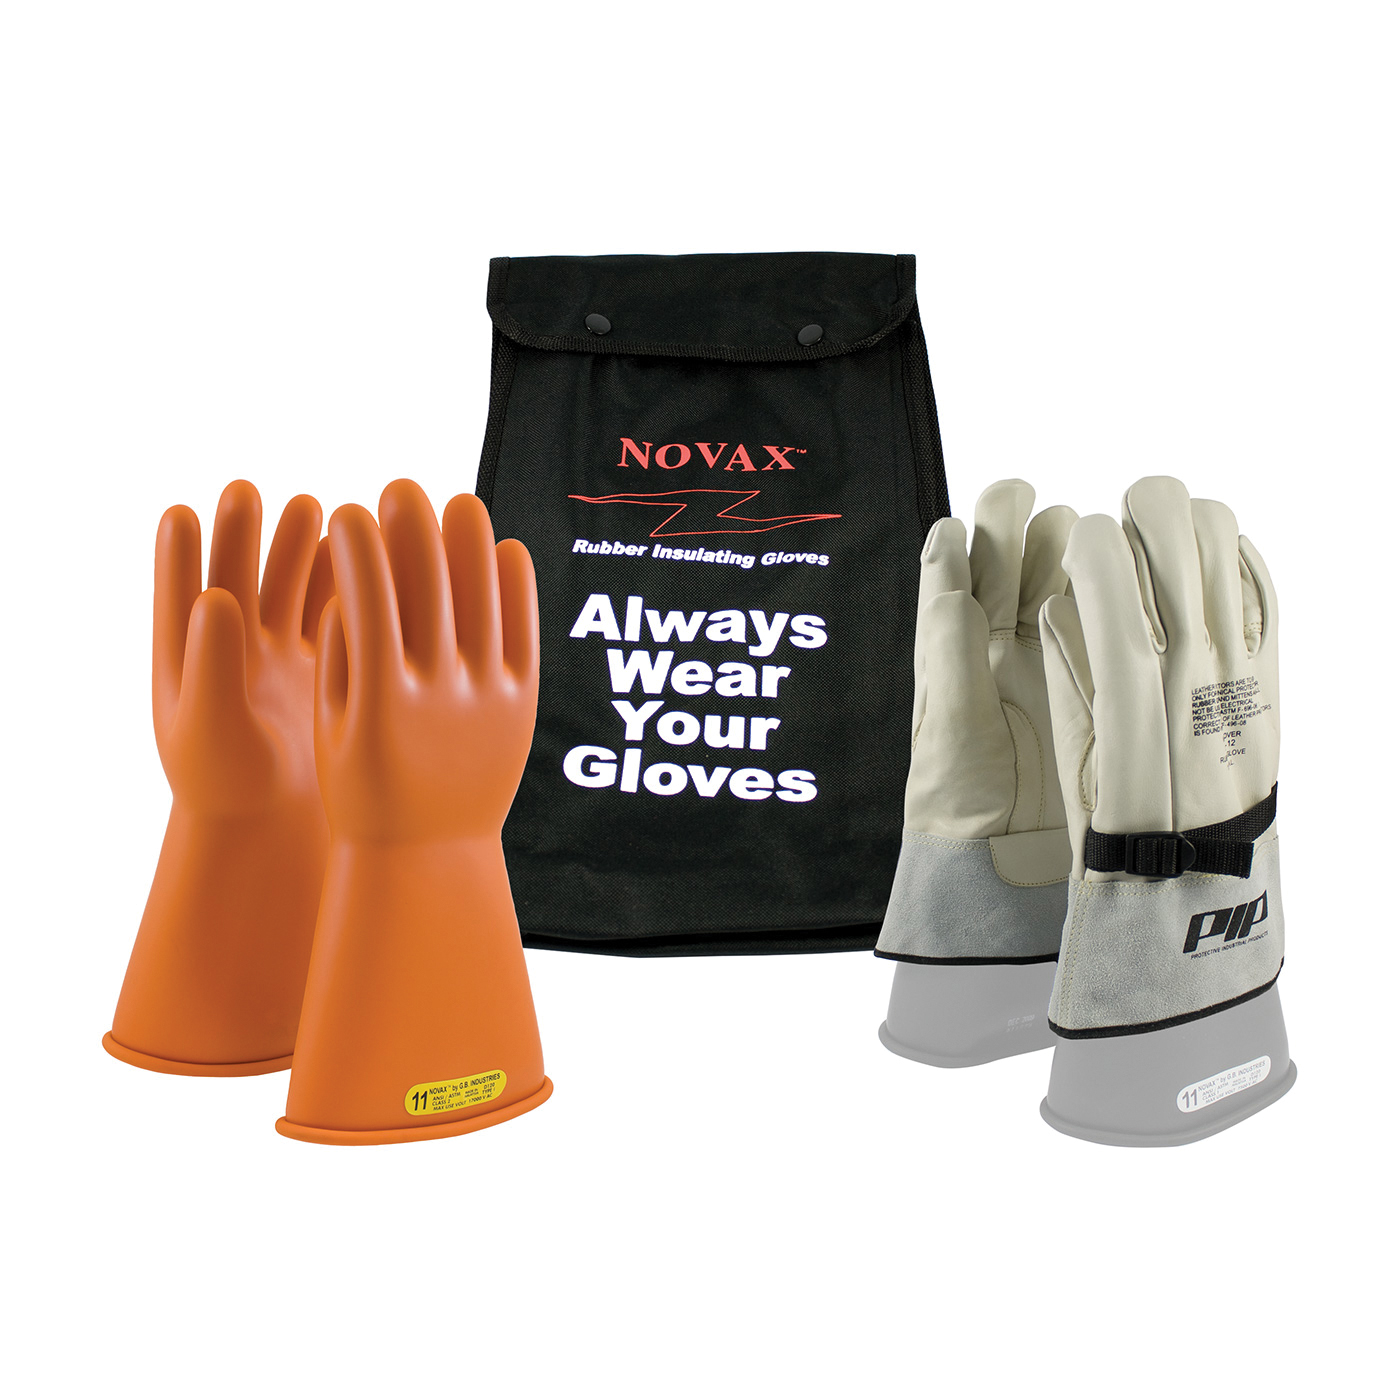 Novax® 147-SK-2/9-KIT Insulating Unisex Electrical Safety Gloves Kit, SZ 9, Cowhide Leather/Natural Rubber, Natural/Orange, 14 in L, ASTM Class: Class 2, 17000 VAC, 25500 VDC Max Use Voltage